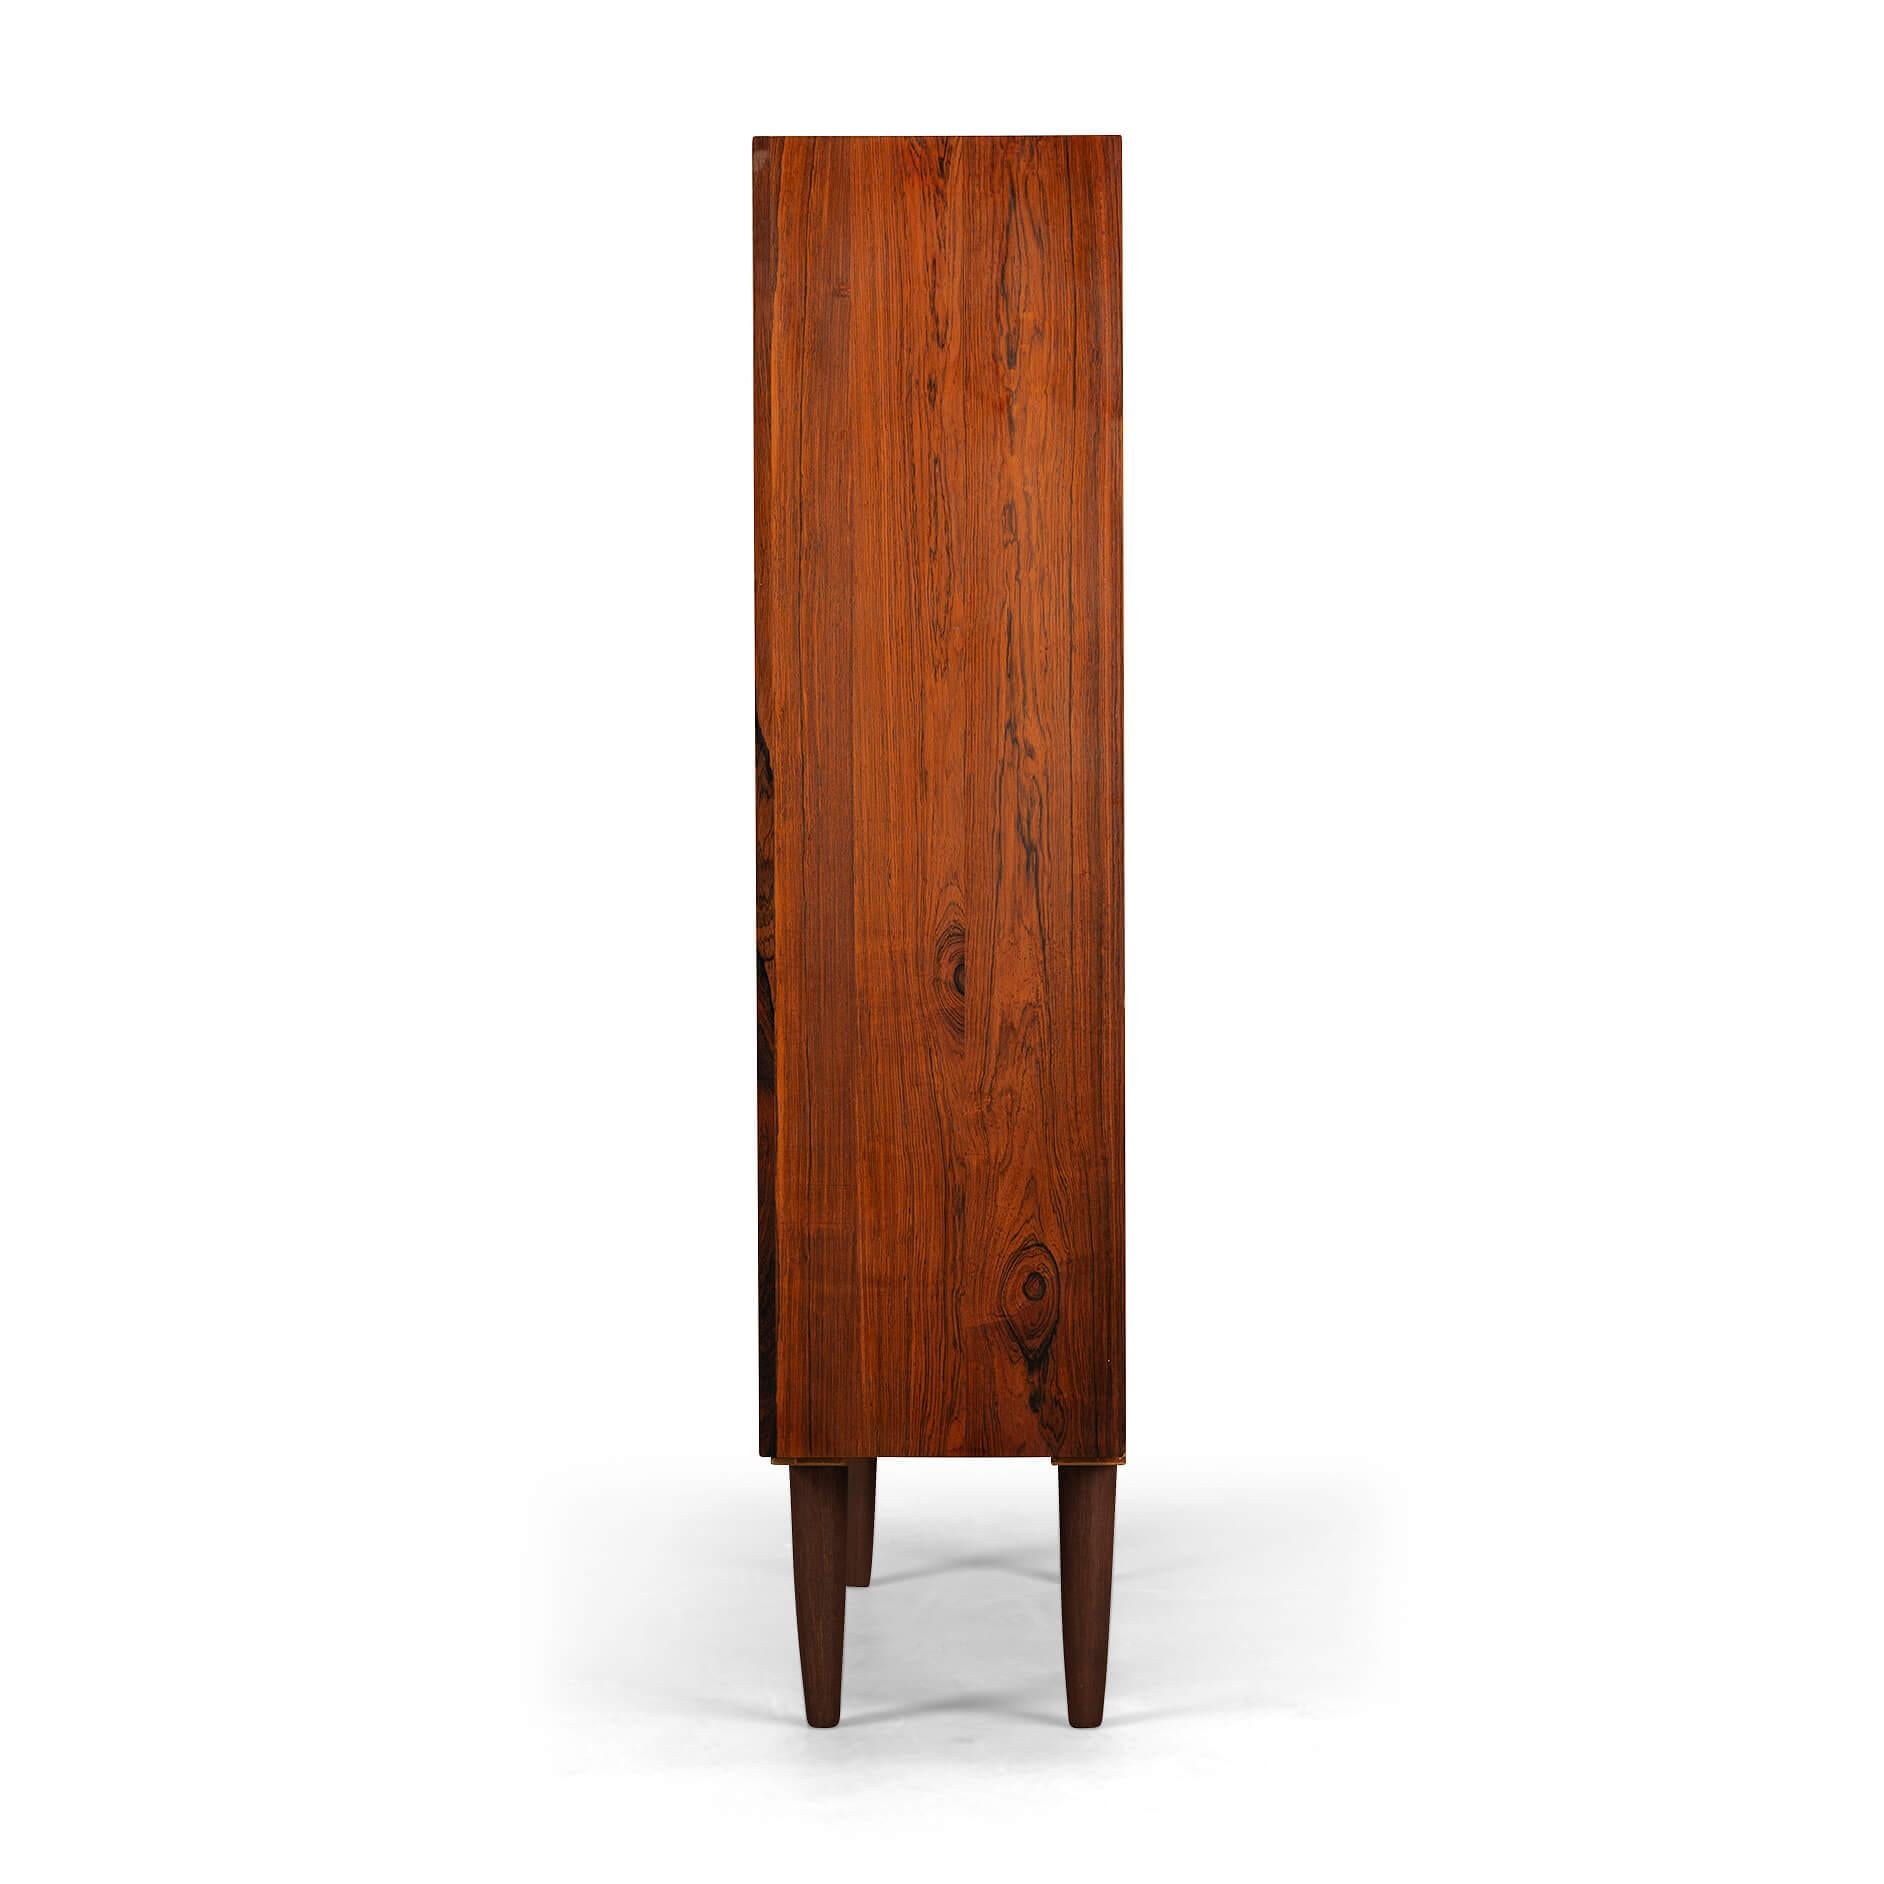 Veneer Danish Design Rosewood Bookcase made by Nexo, 1960s For Sale